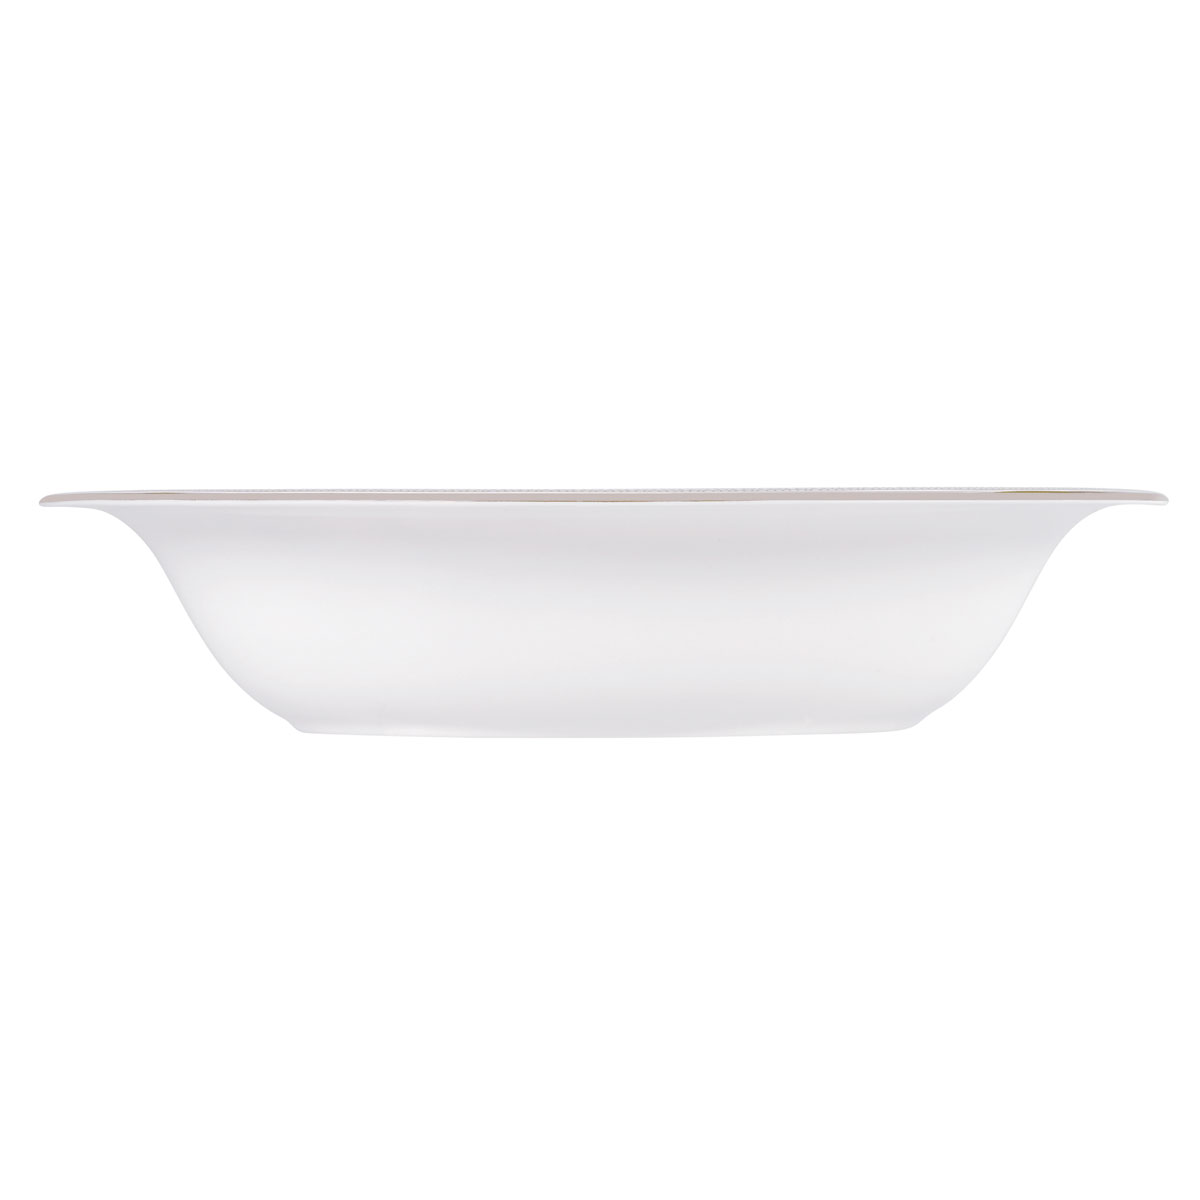 Vera Wang Wedgwood Vera Lace Gold Open Oval Vegetable Bowl